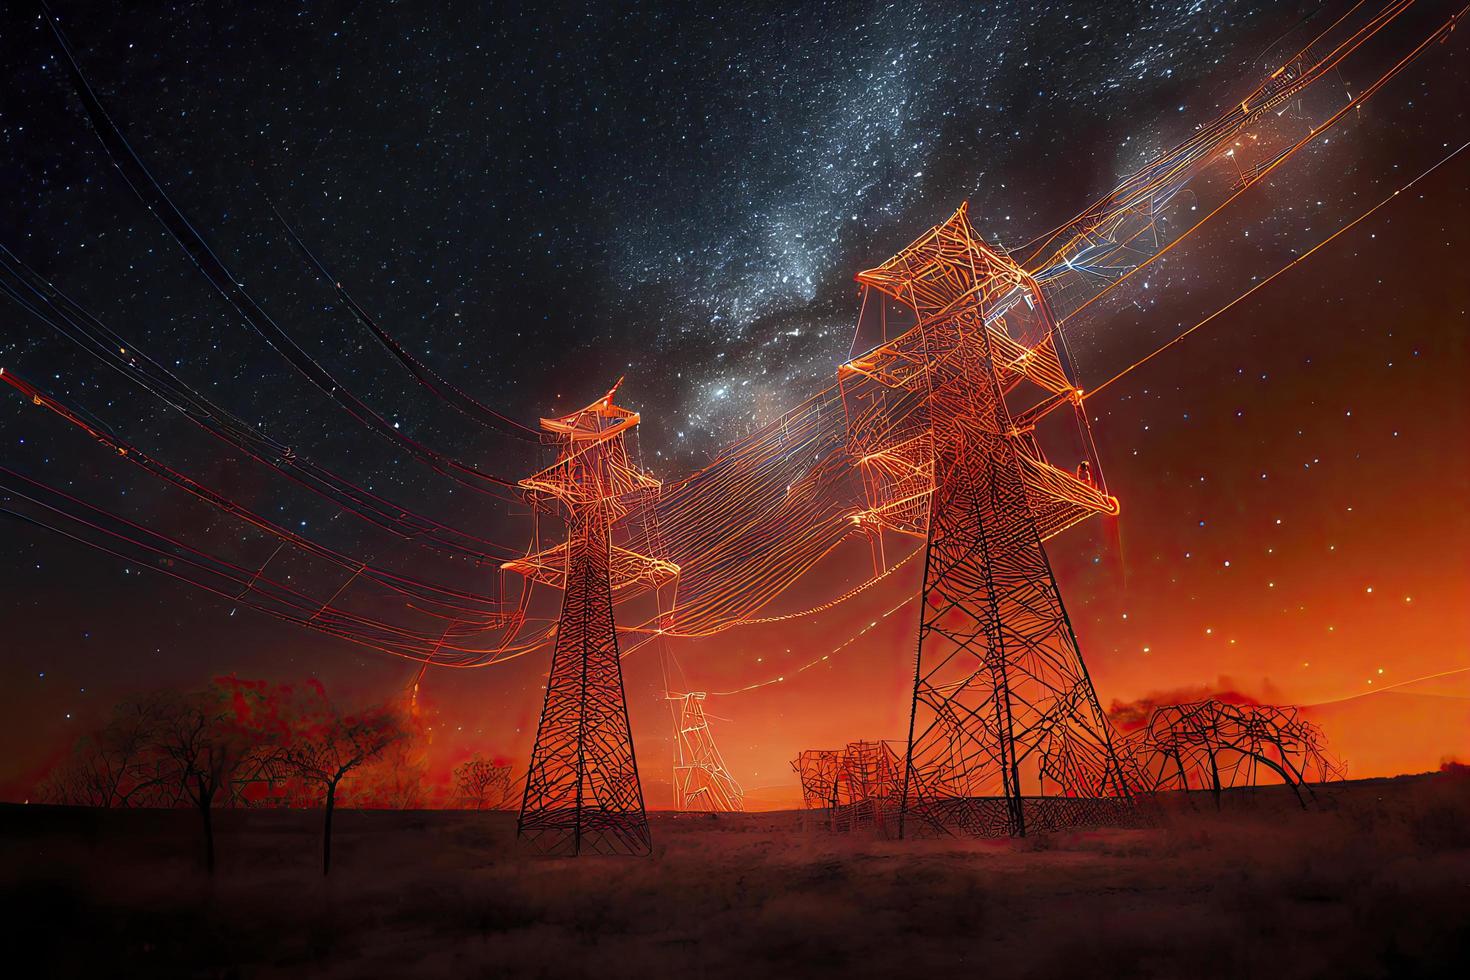 Electricity transmission towers with orange glowing wires the starry night sky photo